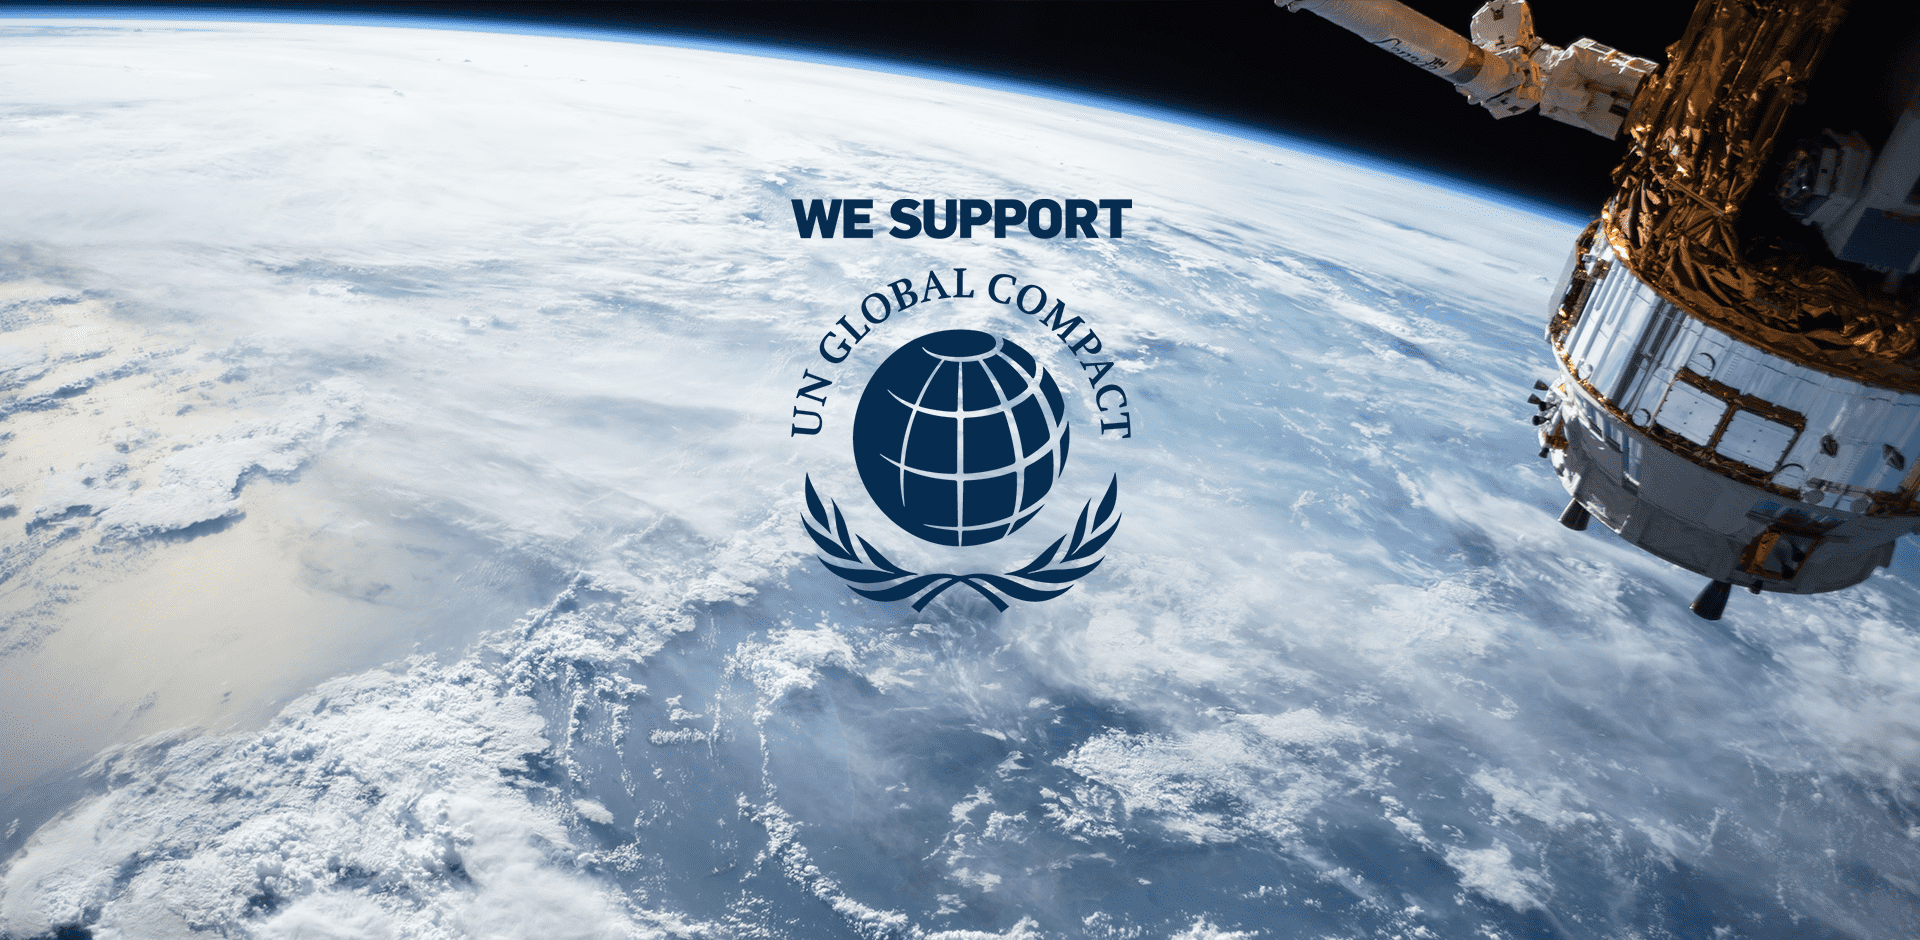 Funktional Becomes A Participant of the United Nations Global Compact